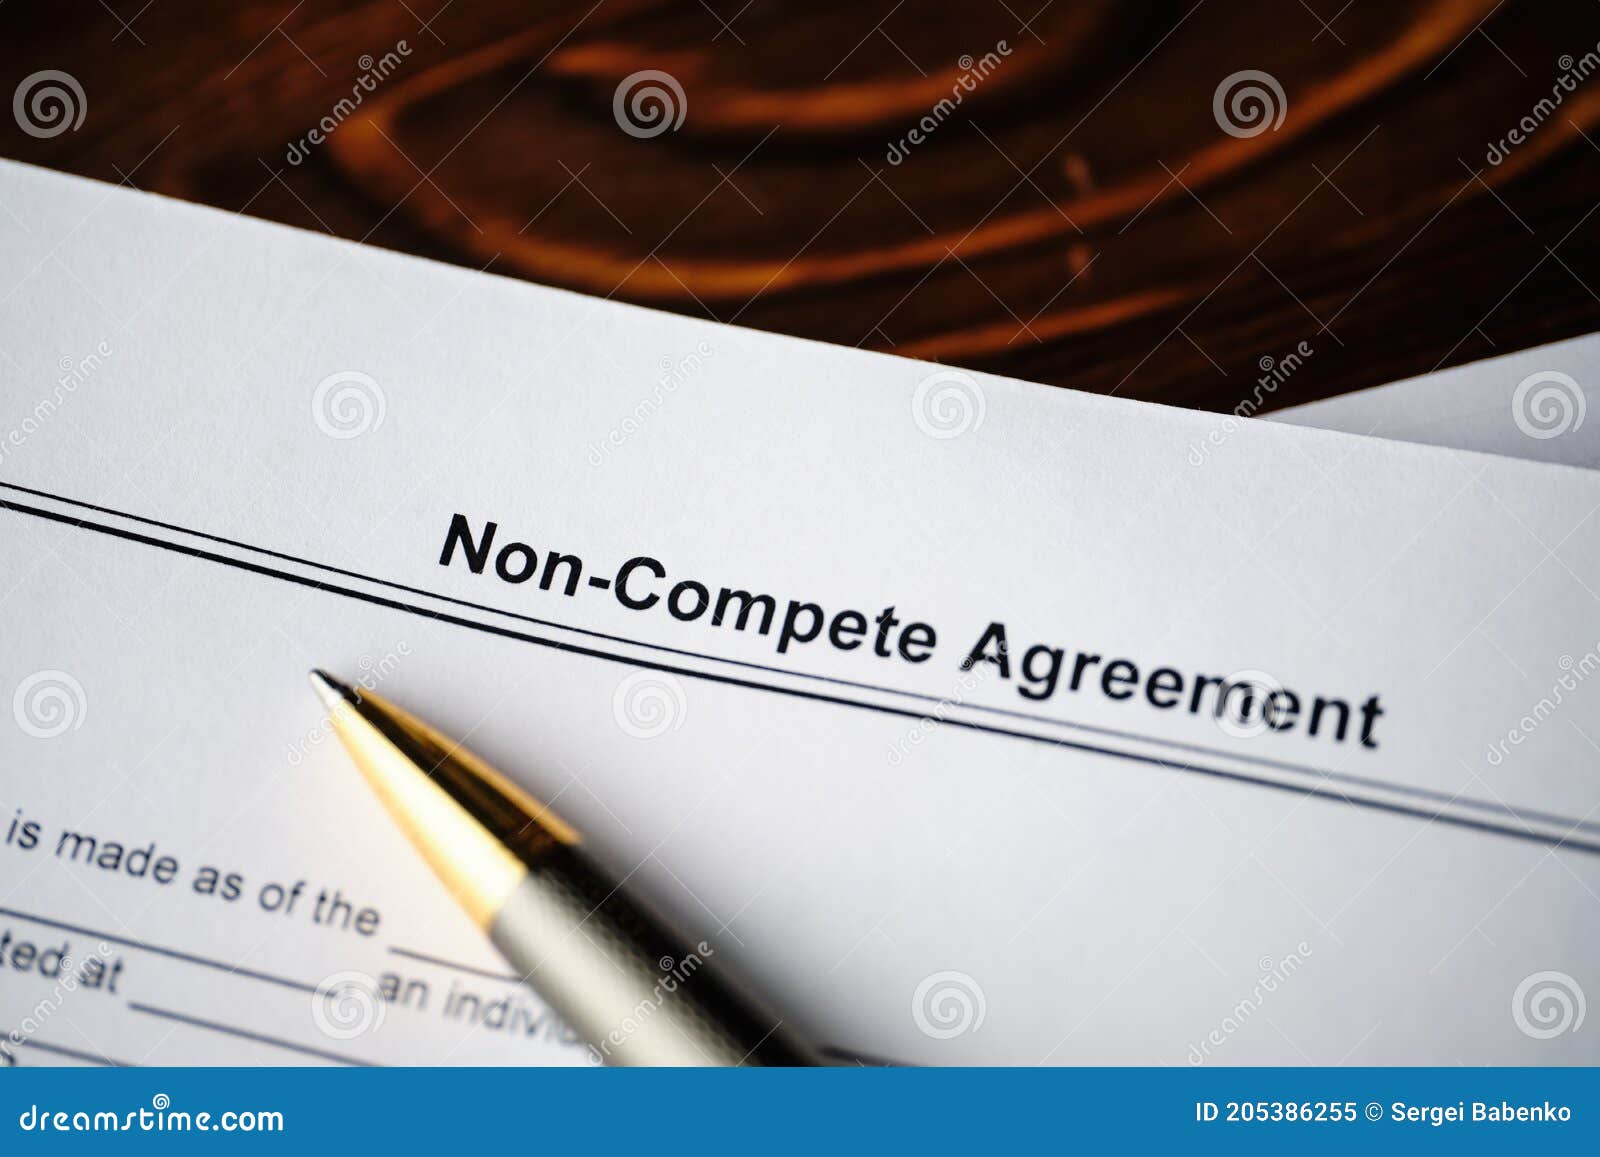 legal document non-compete agreement on paper close up